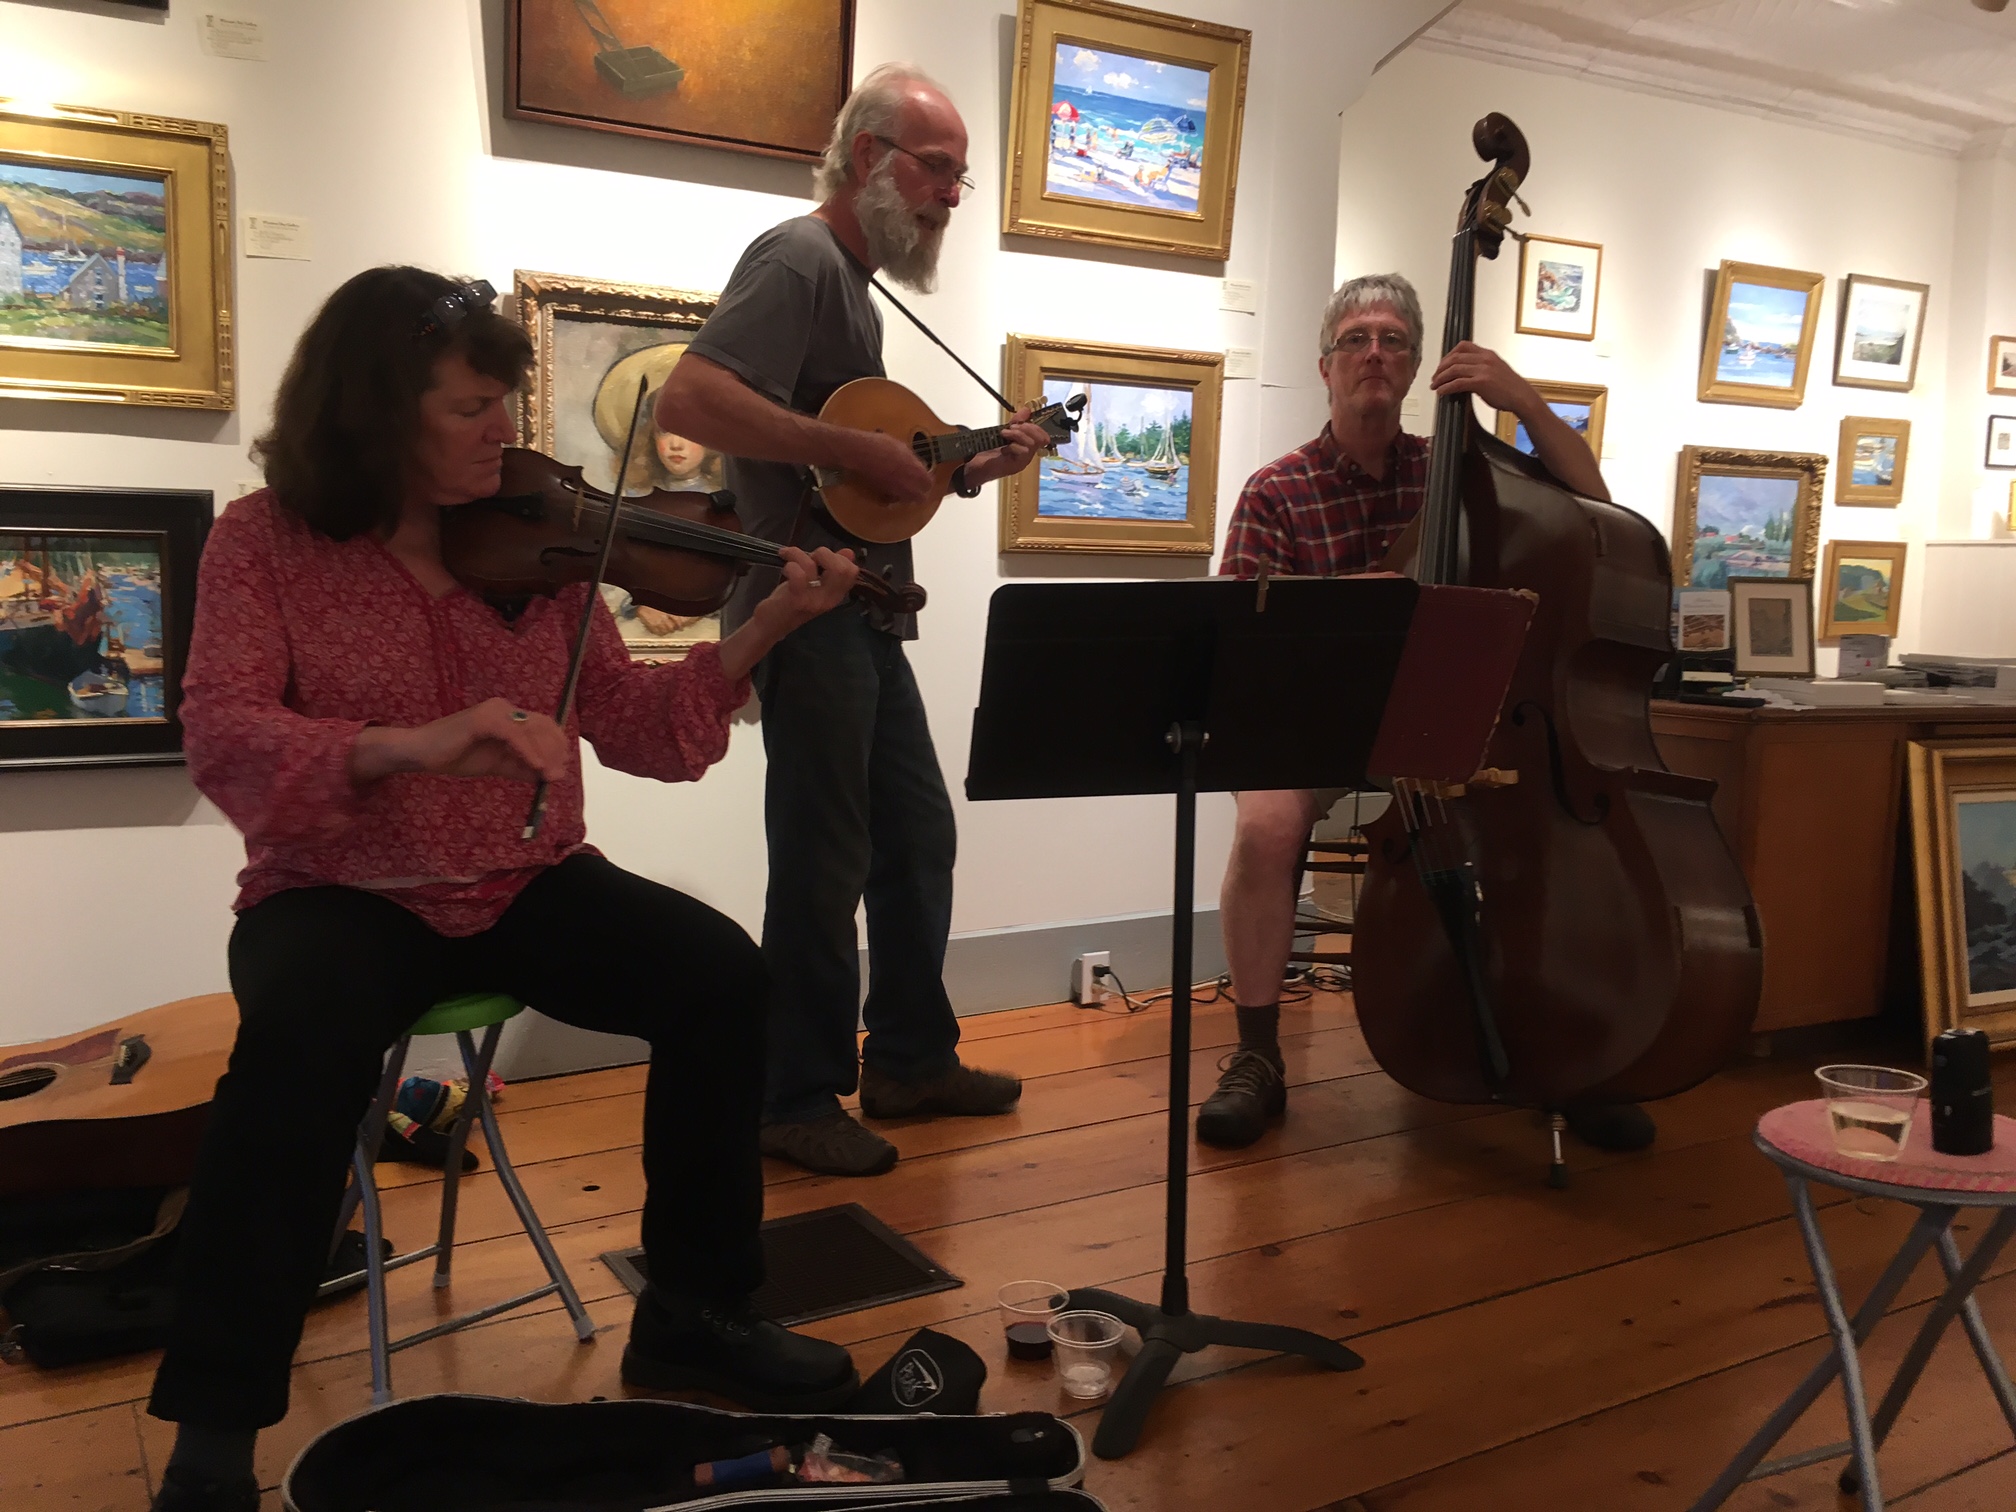 Married with Chitlins in Wiscasset Bay Gallery